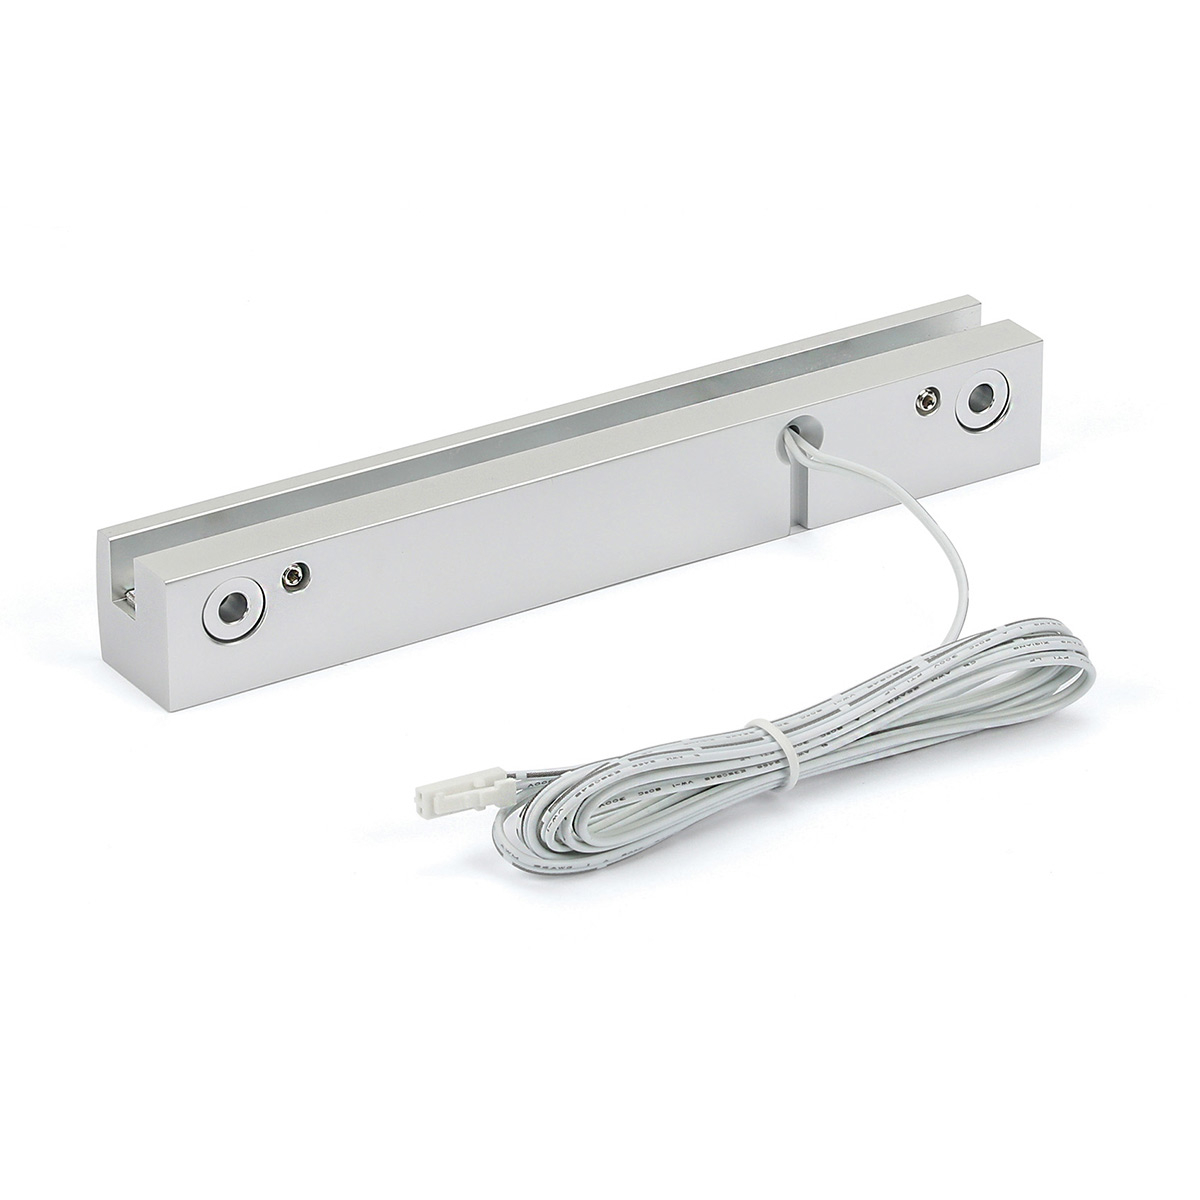 RED LED Sign Clamp in 3 1/8'' (80 mm) length X 1'' (25.4 mm) Silver satin aluminum finish.Mount Kit Supports Signs Up To 5/16'' Thick, Wall Mount, Low Voltage transformer included